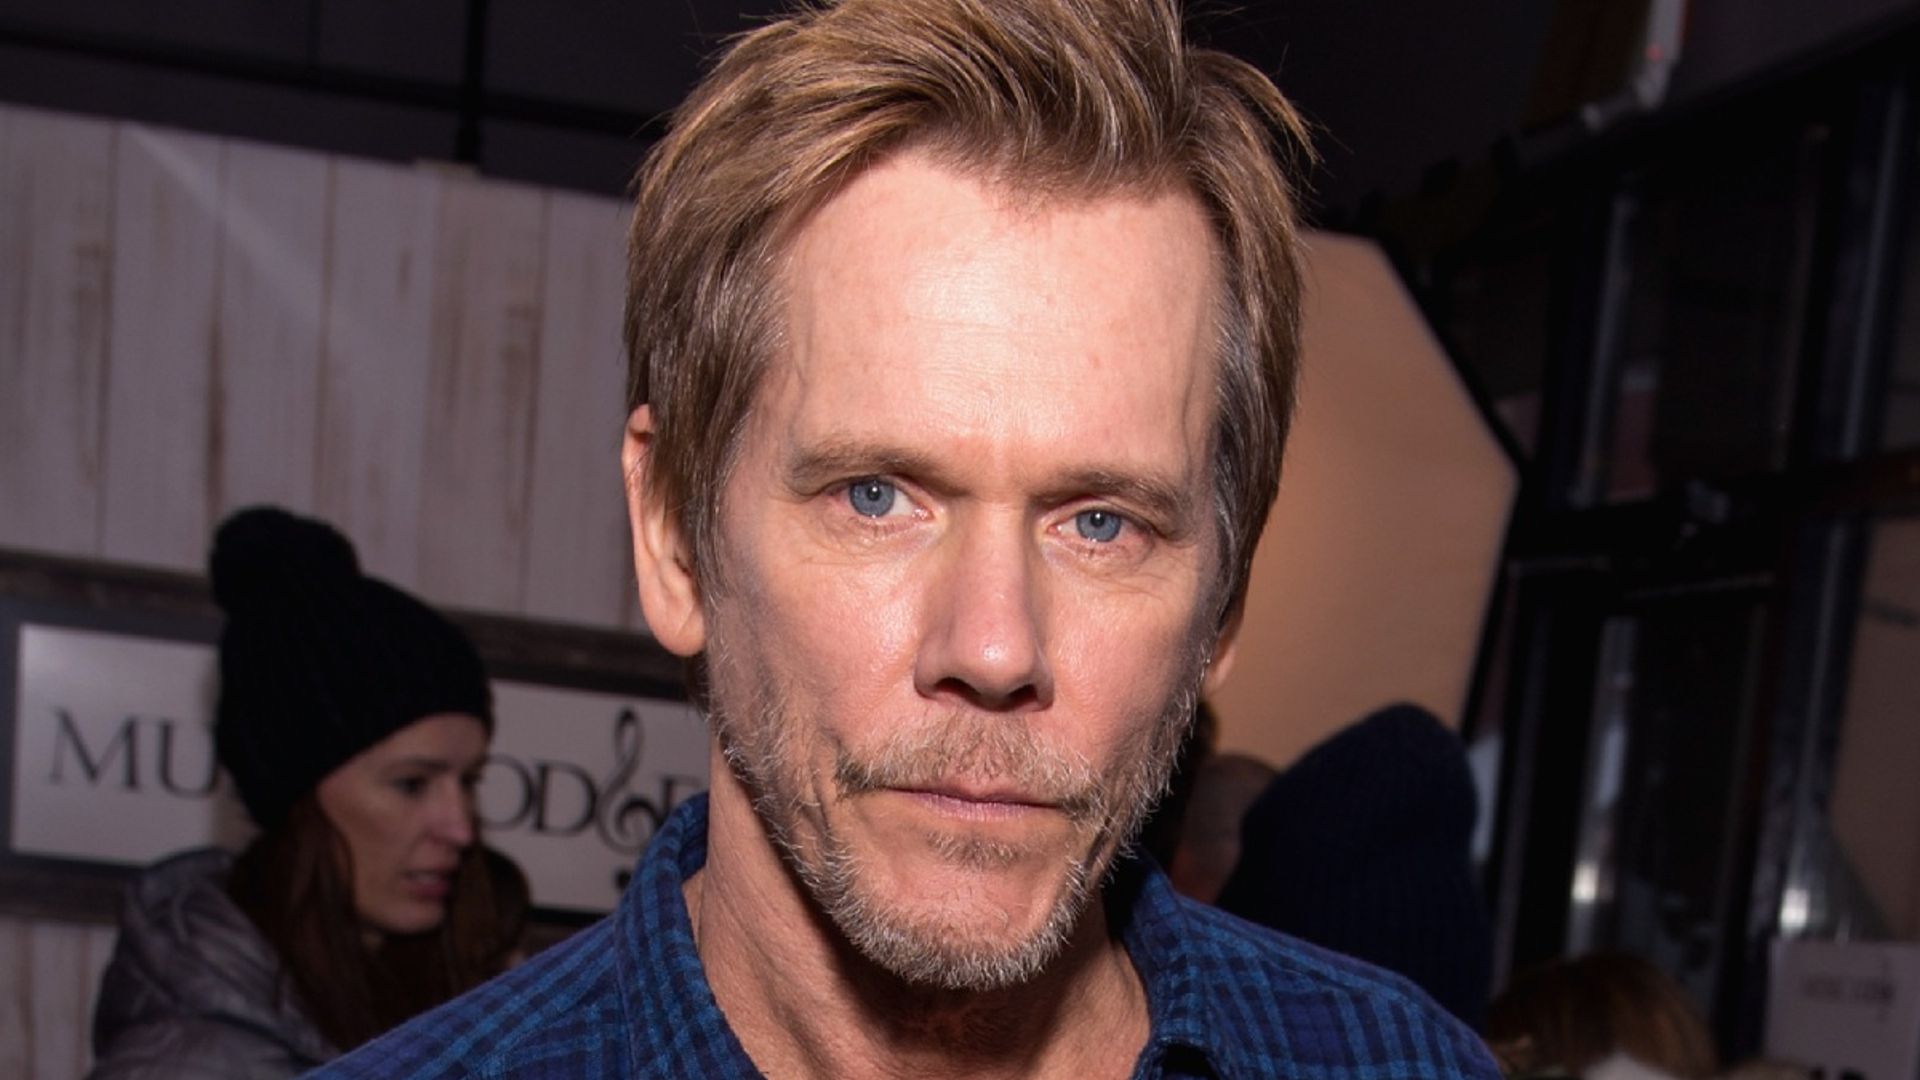 Kevin Bacon in tears as he sends video message after tragic Texas school shooting